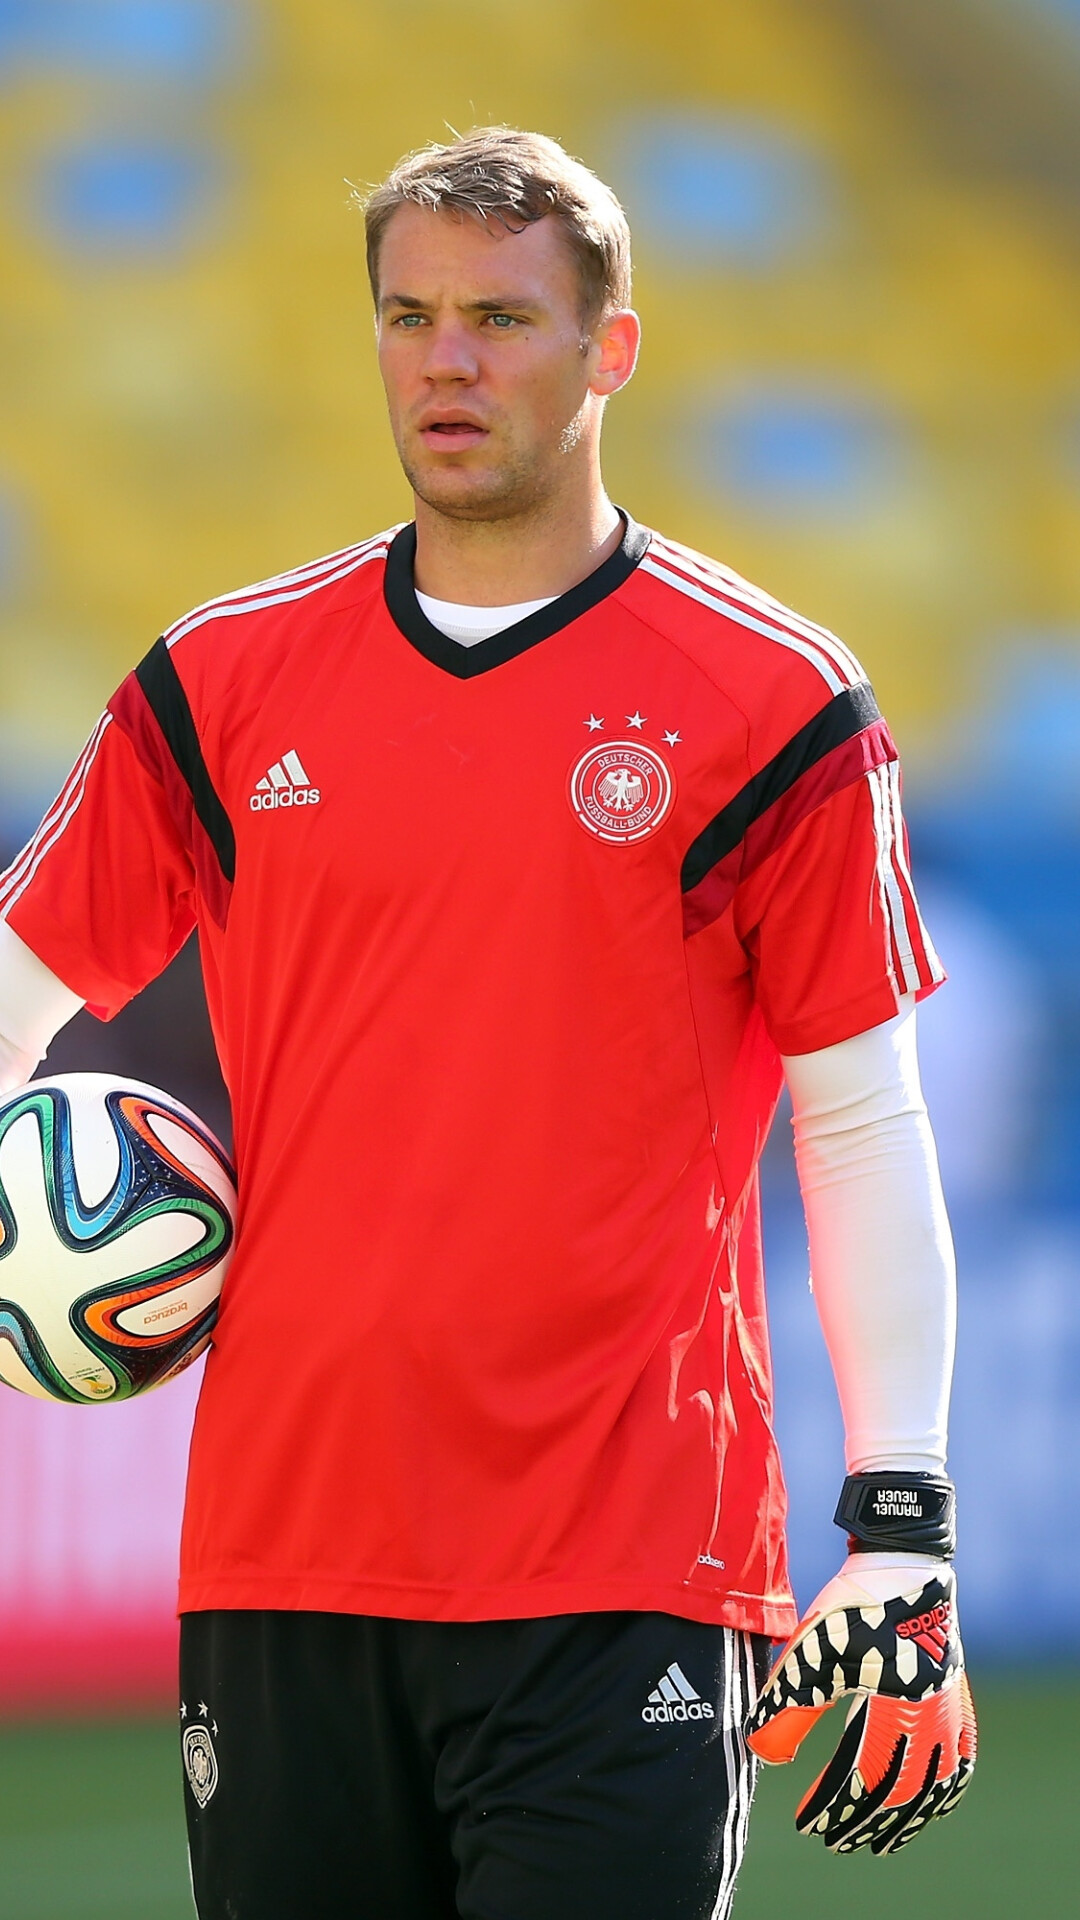 Germany Soccer Team: Manuel Neuer, A professional goalkeeper and the captain of the Bundesliga club Bayern Munich. 1080x1920 Full HD Wallpaper.